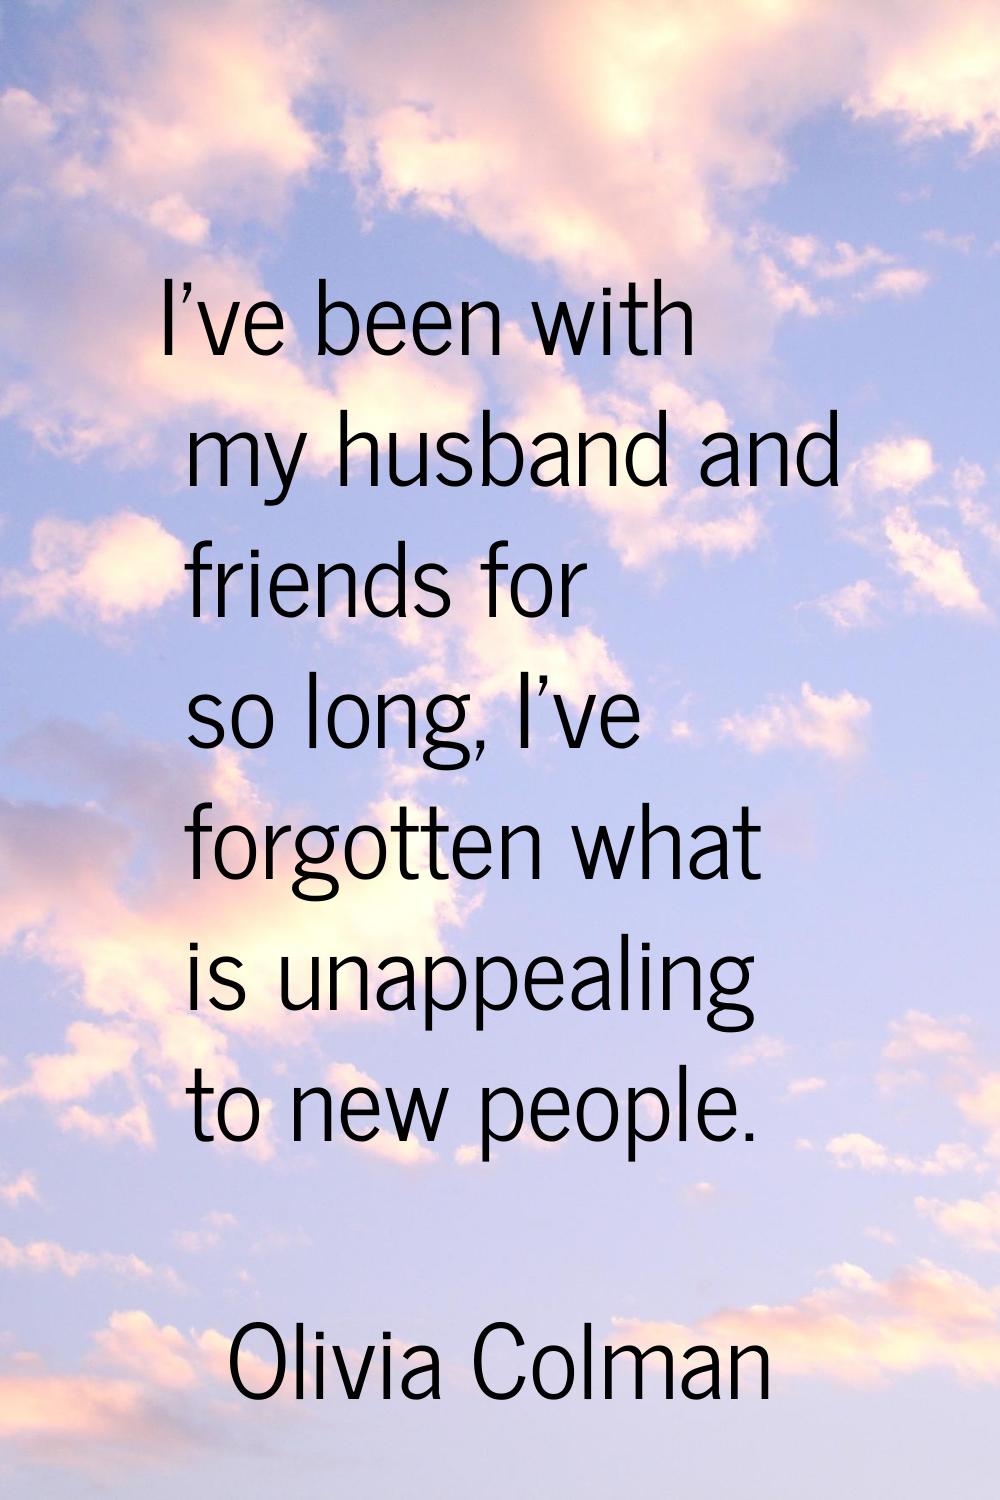 I've been with my husband and friends for so long, I've forgotten what is unappealing to new people